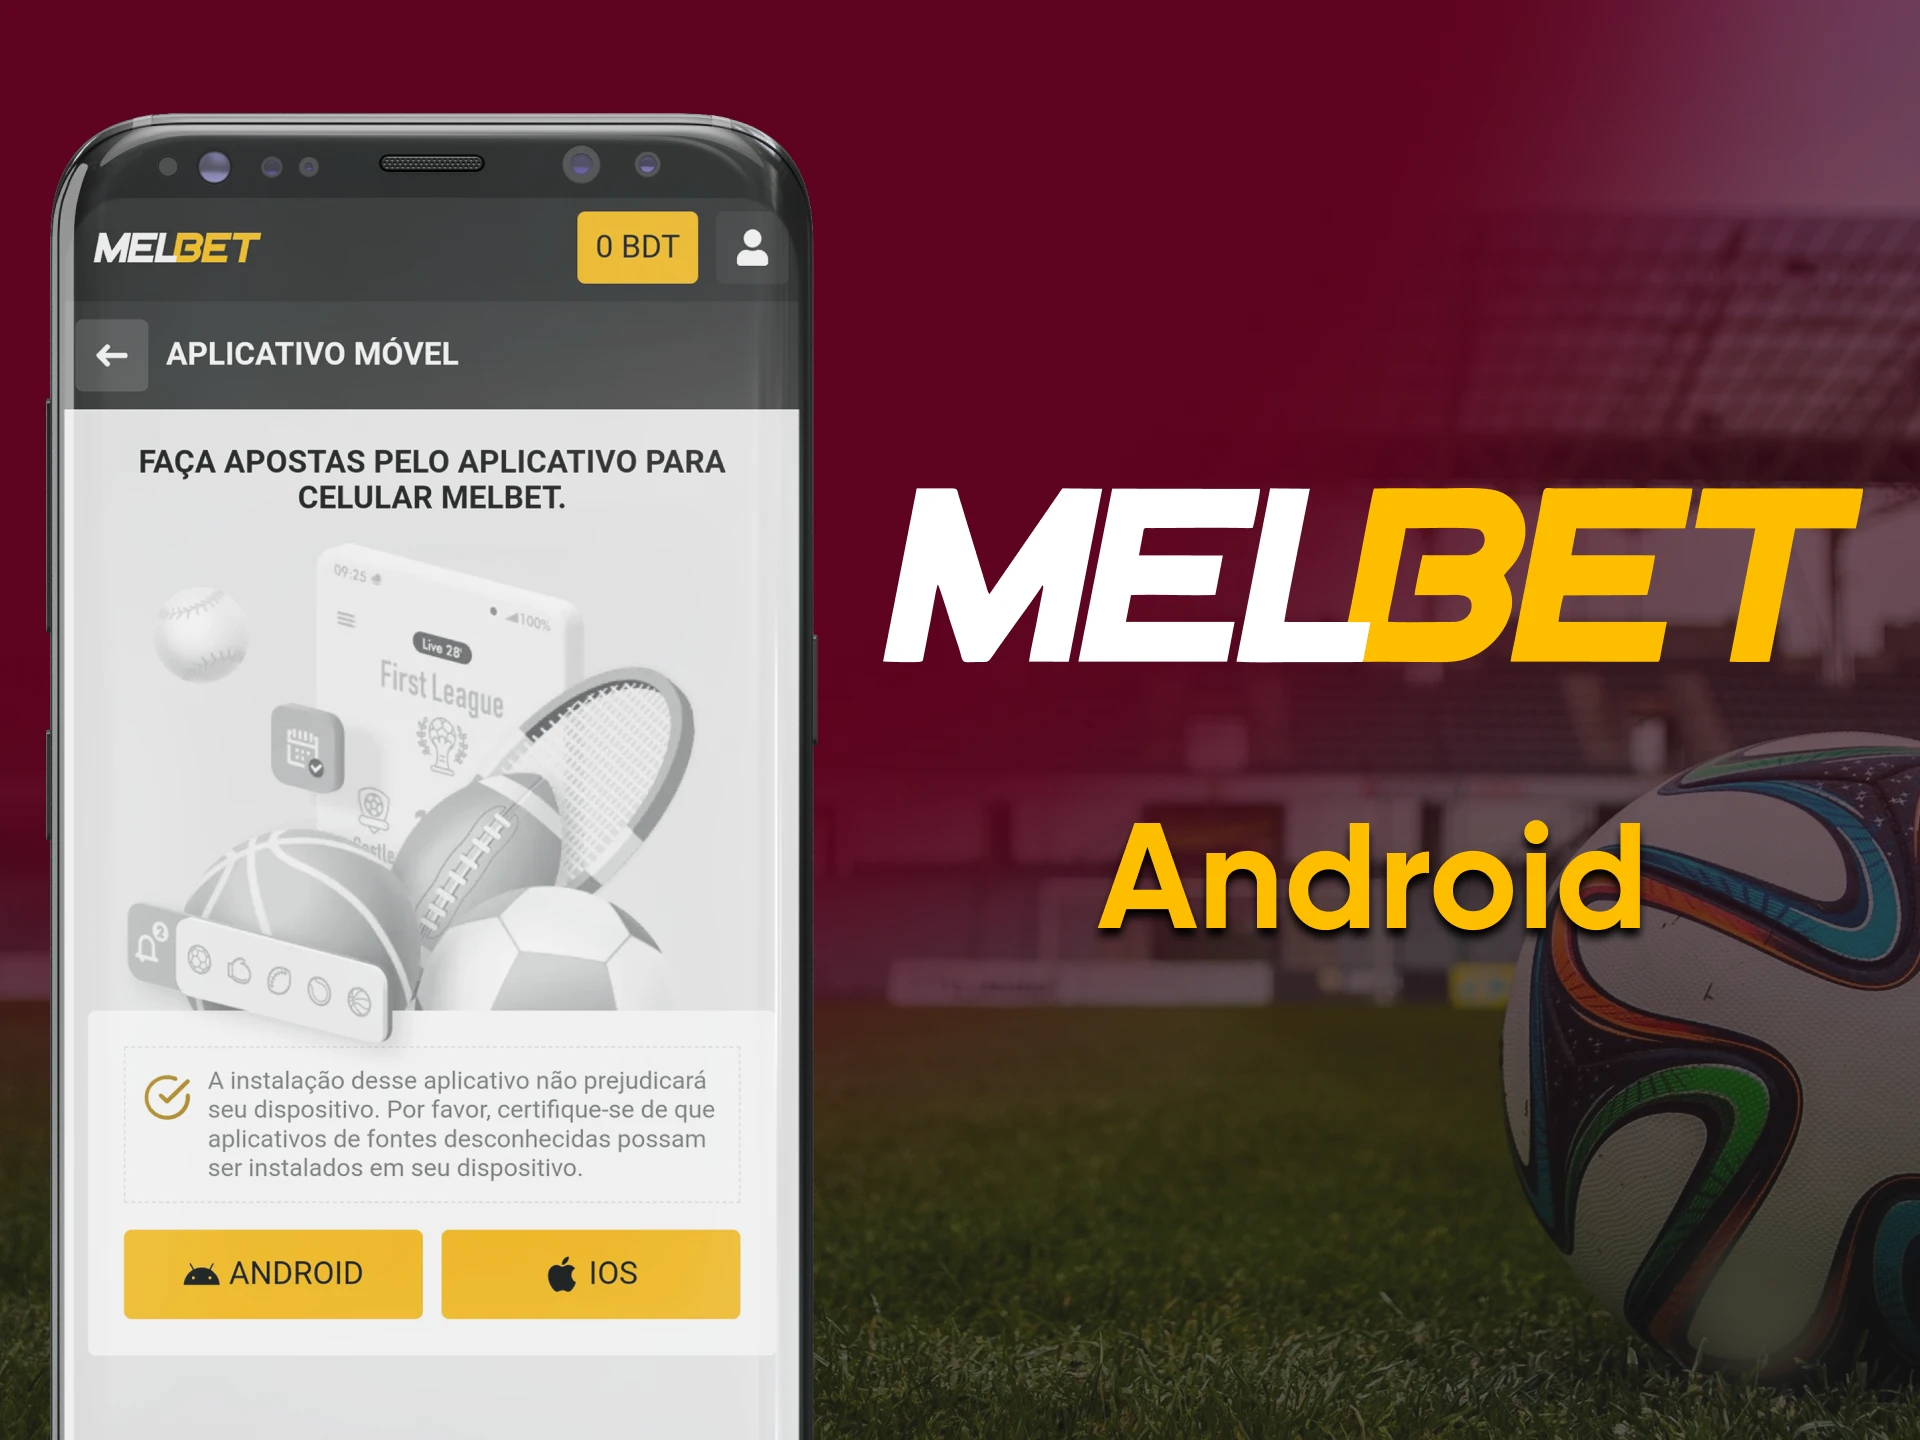 If you want to place bets on your phone, you can download the Melbet Android app.